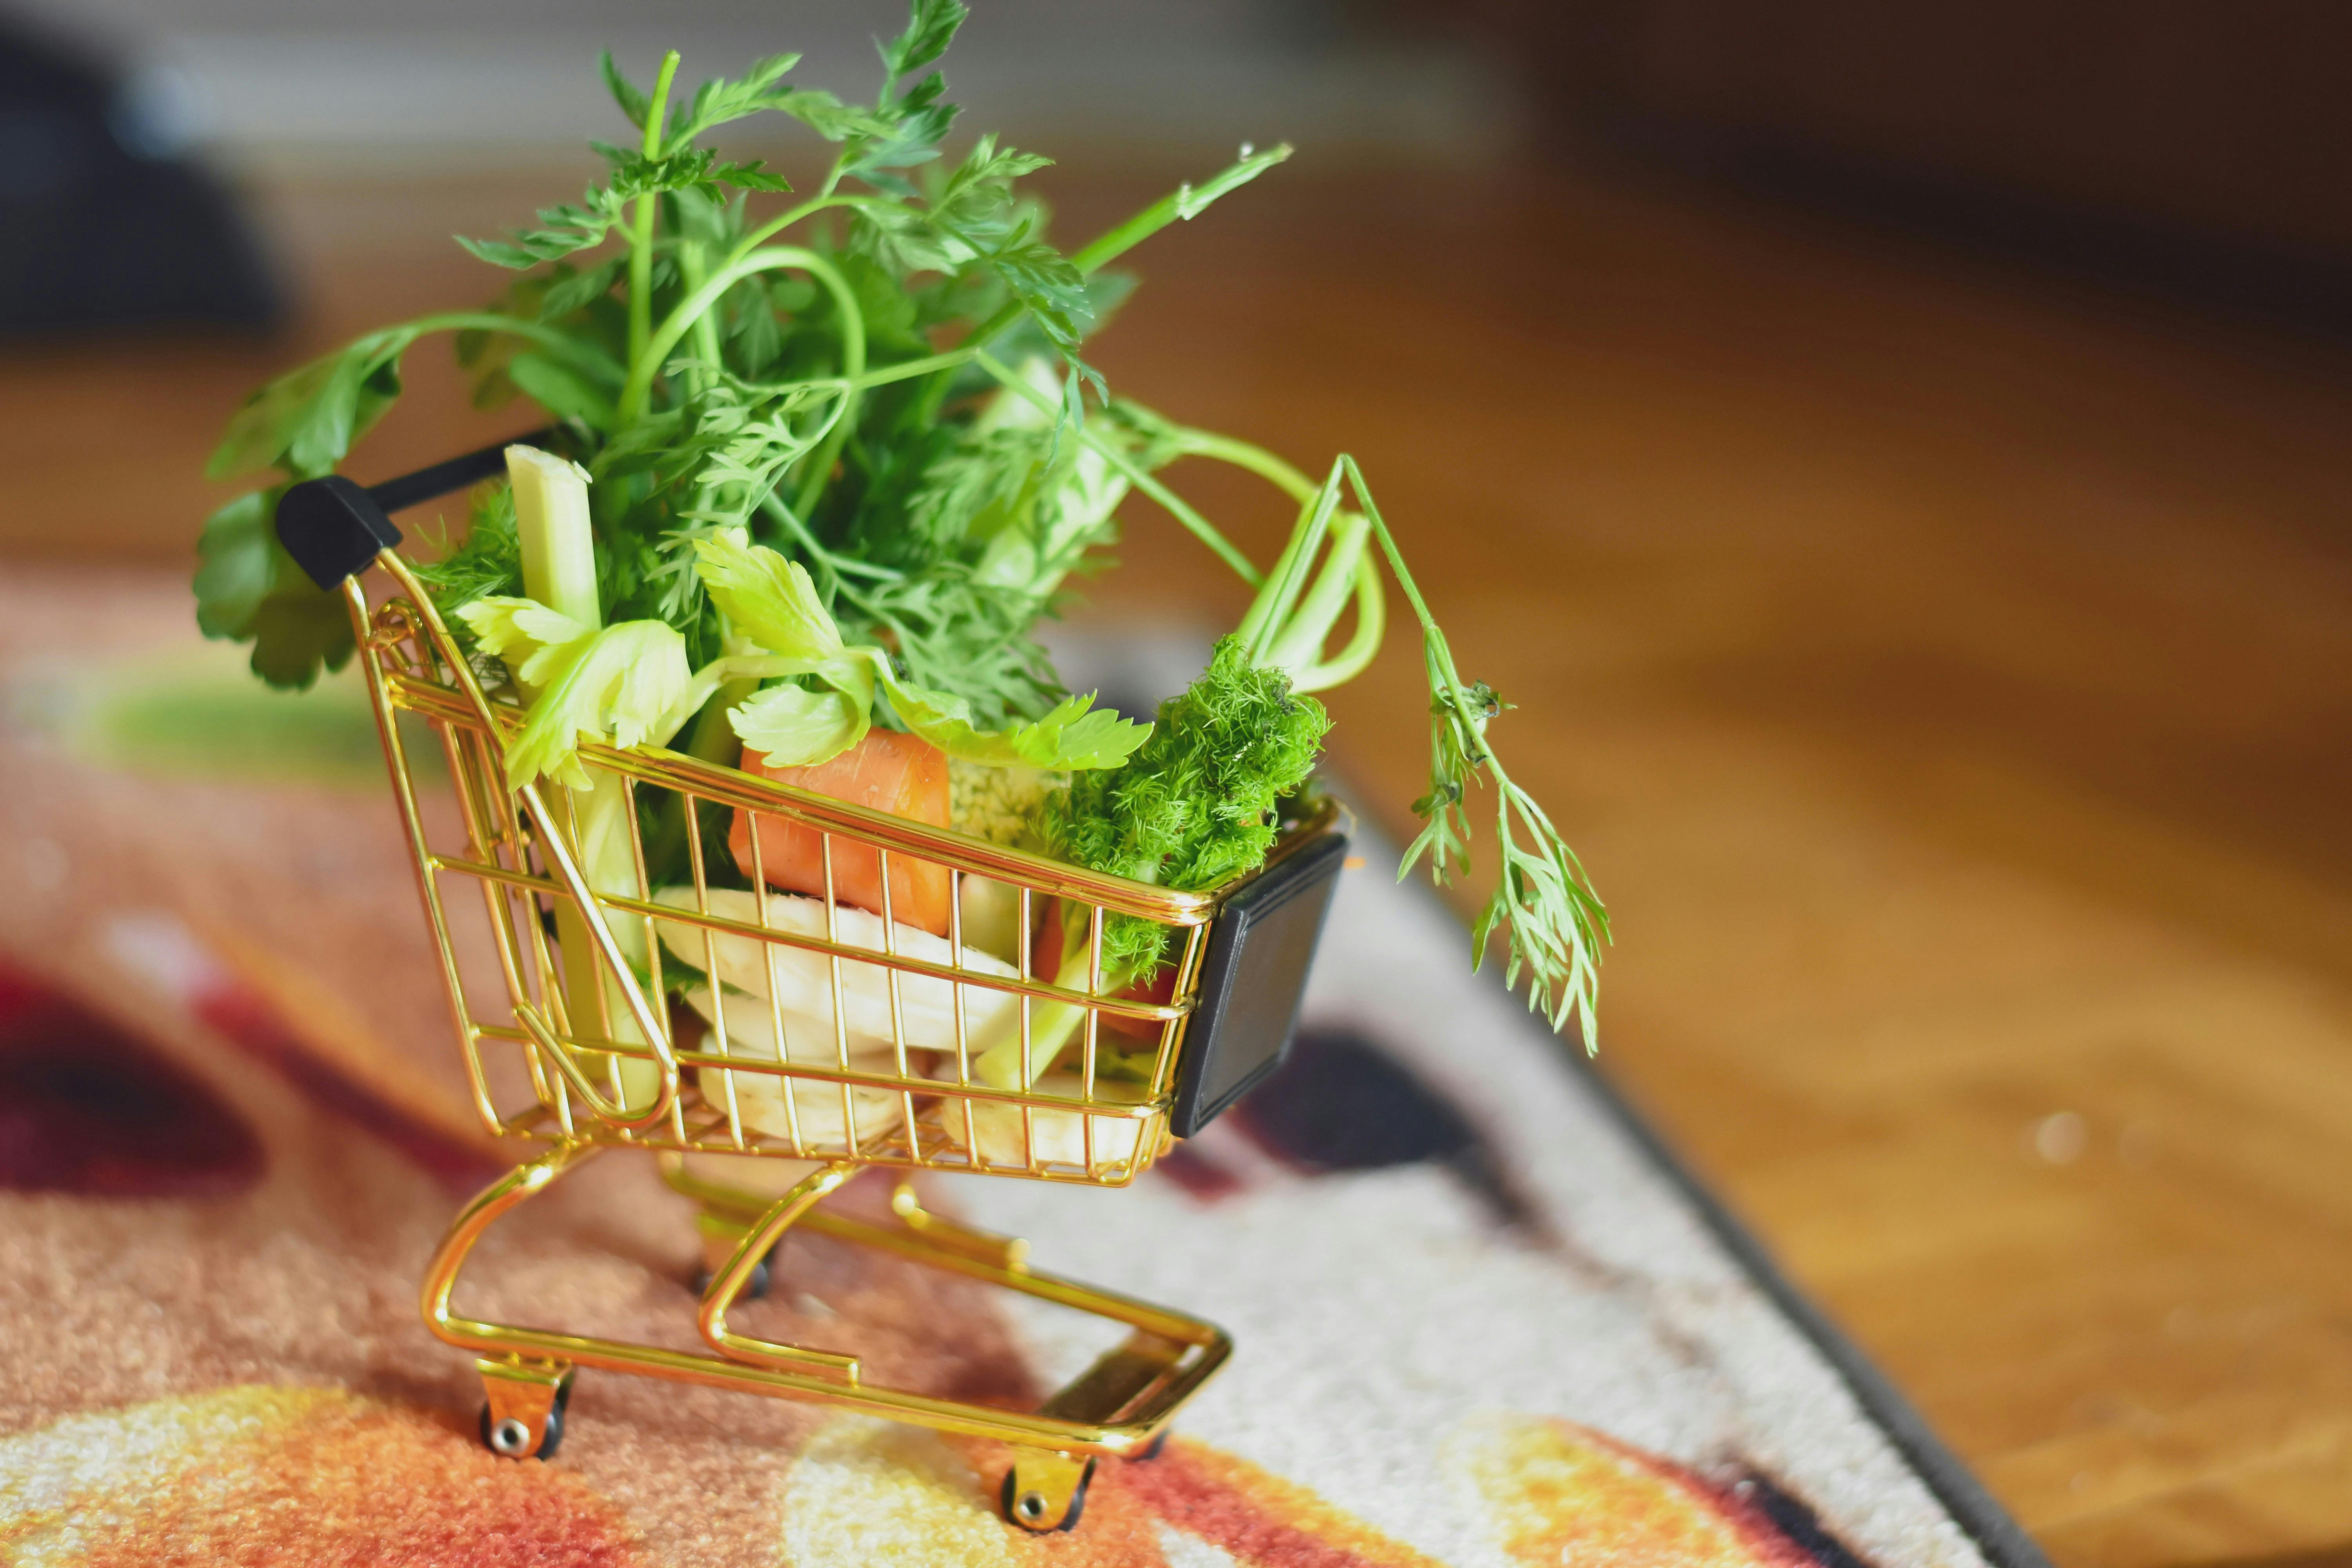 A small brass shopping cart overflowing with small vegetable parts on a soft rug, with some wooden floor visible next to the rug.